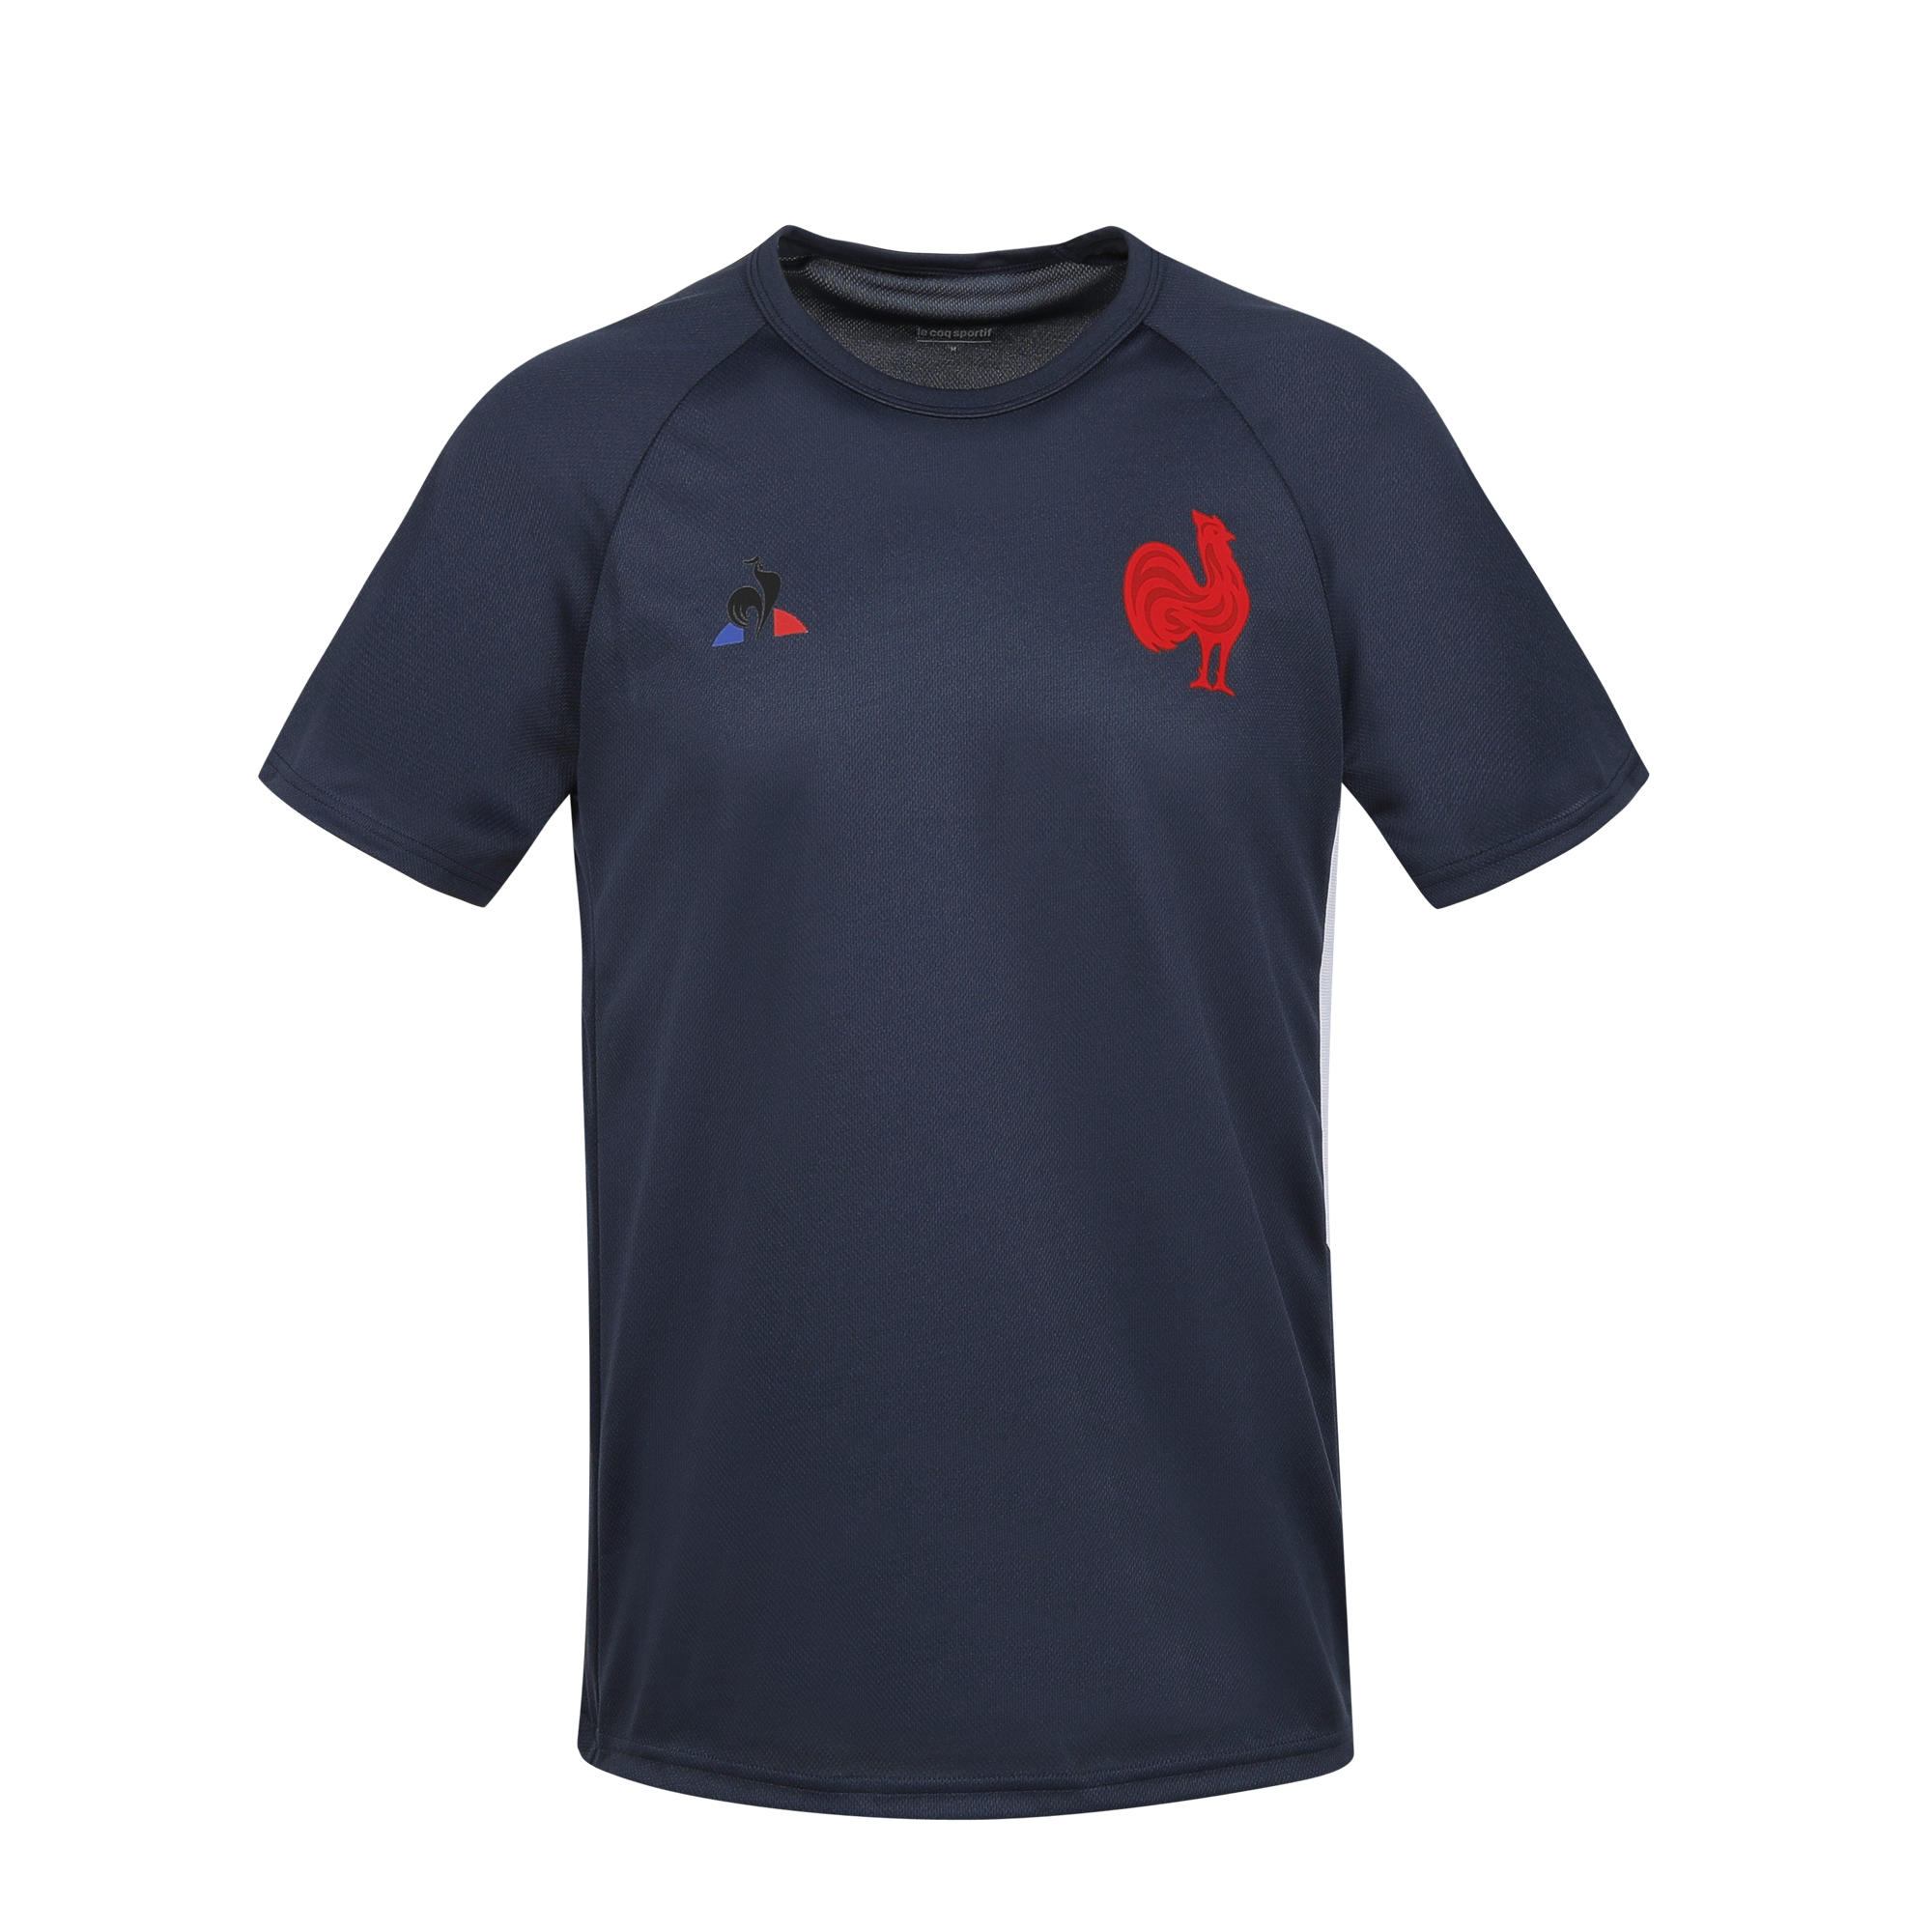 8C-PLUS Kids' Short-Sleeved Rugby Training Replica T-Shirt - France